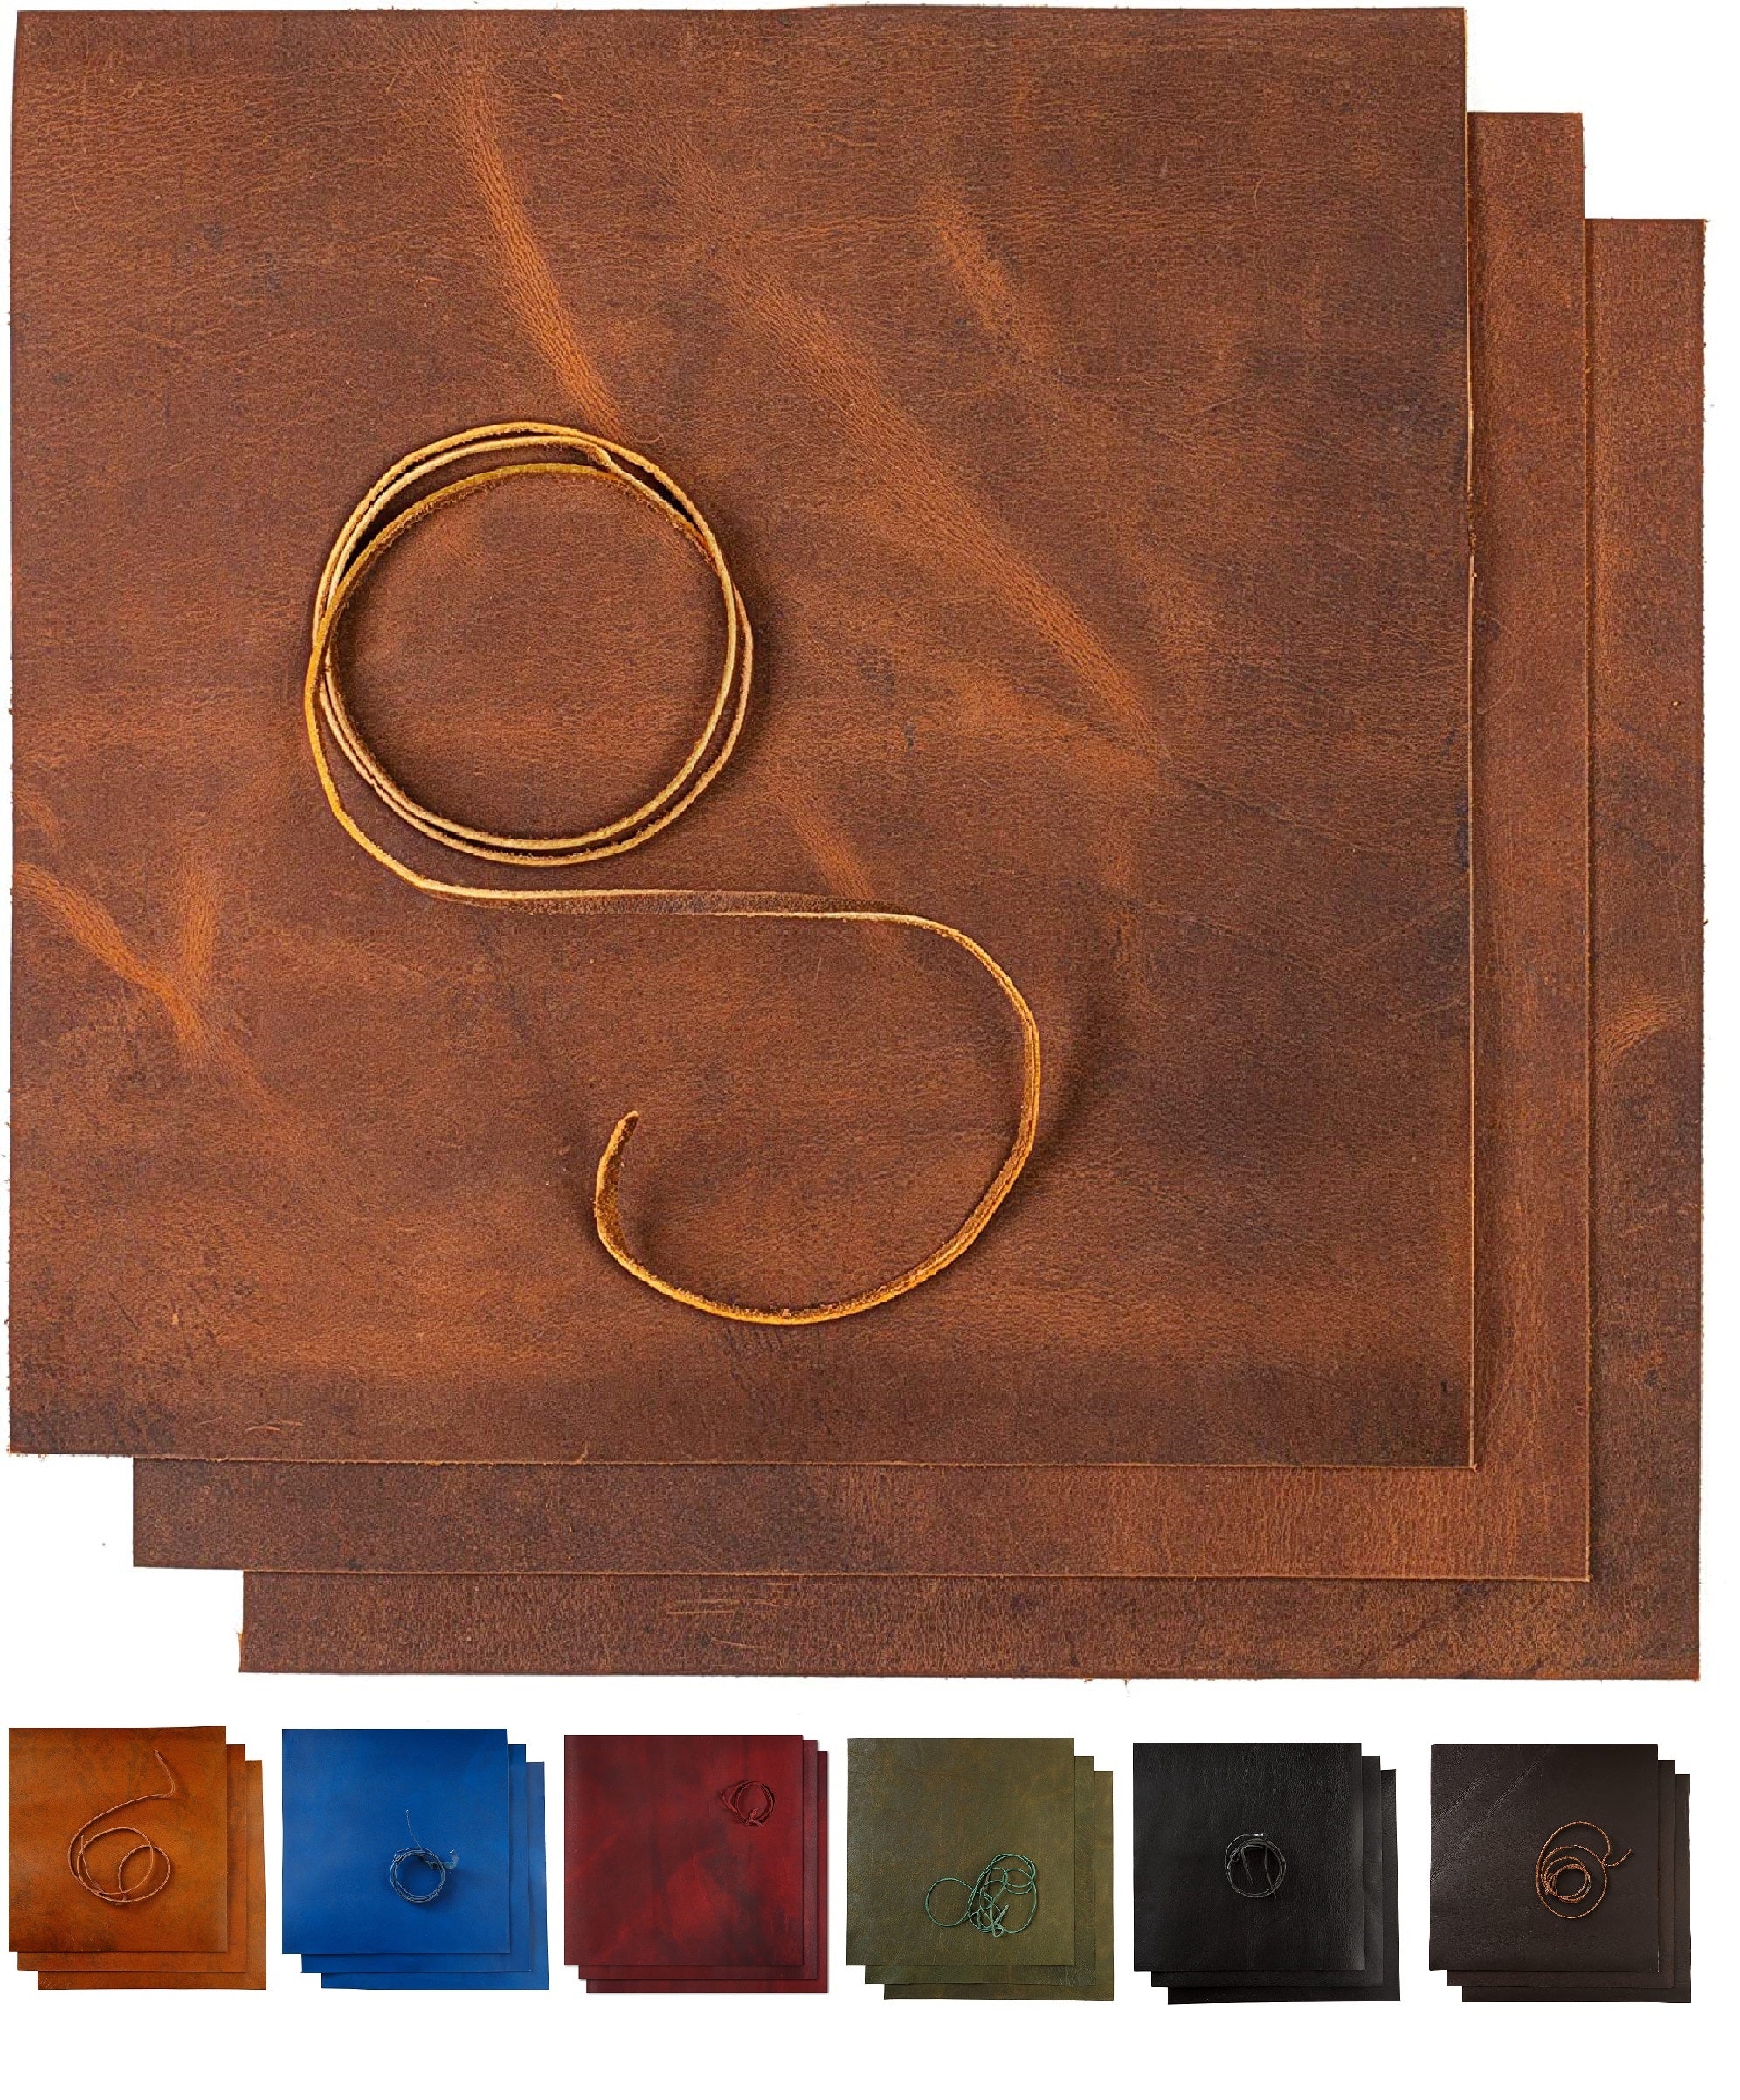 Assorted Colors Leather Scraps for Leather Crafts – 3lbs Mixed Sizes,  Shapes with 36 Cord - Full Grain Buffalo Leather Remnants from Journal  Making 